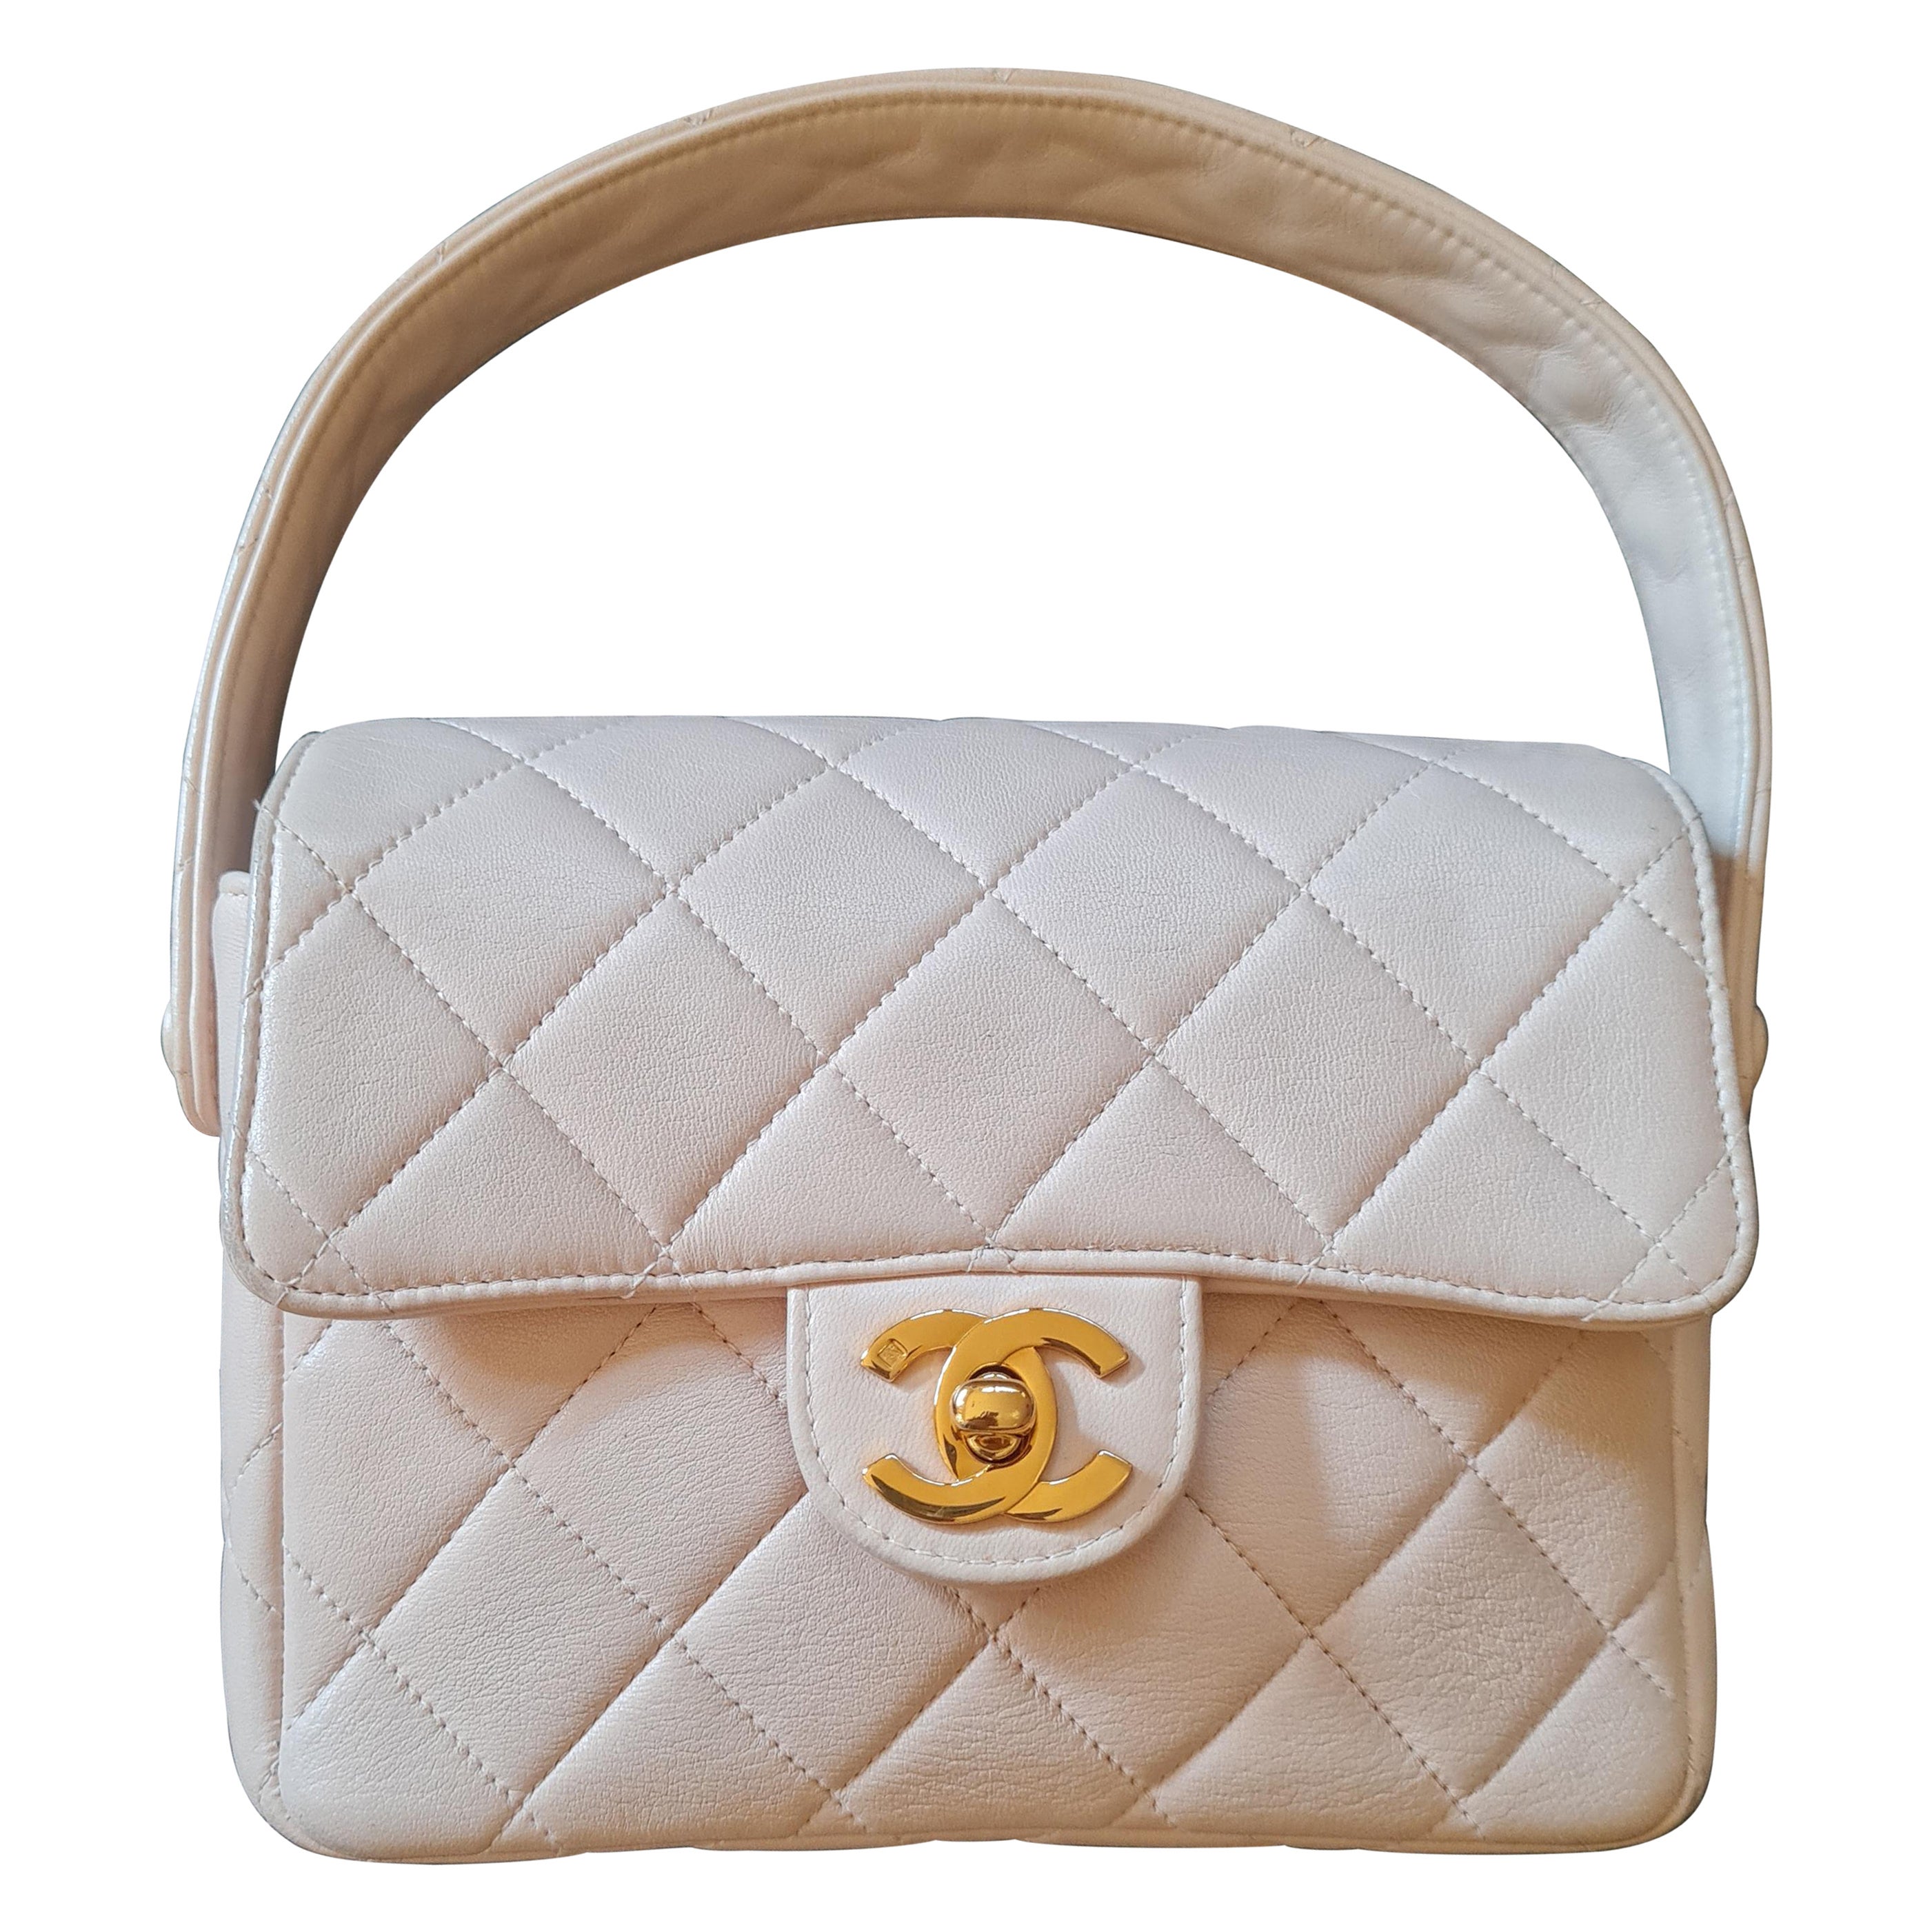 Chanel 1990s Quilted Lambskin Mini Top Handle Bag